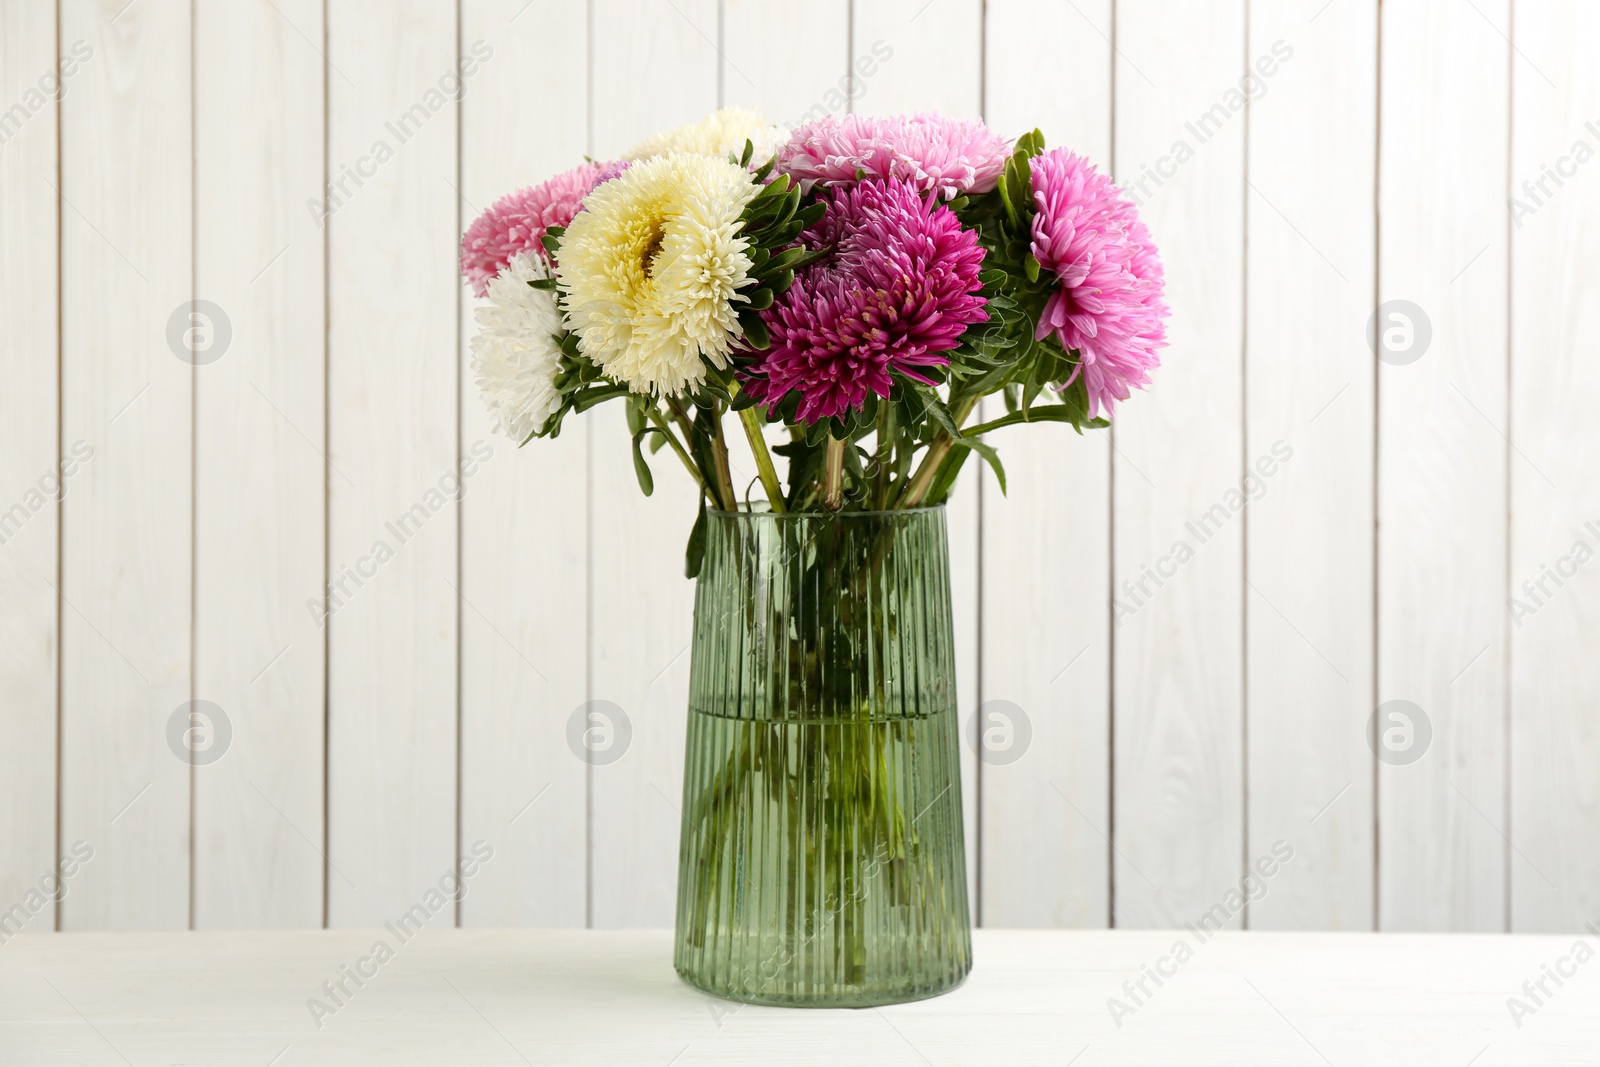 Photo of Beautiful asters in vase on table against white wooden background. Autumn flowers